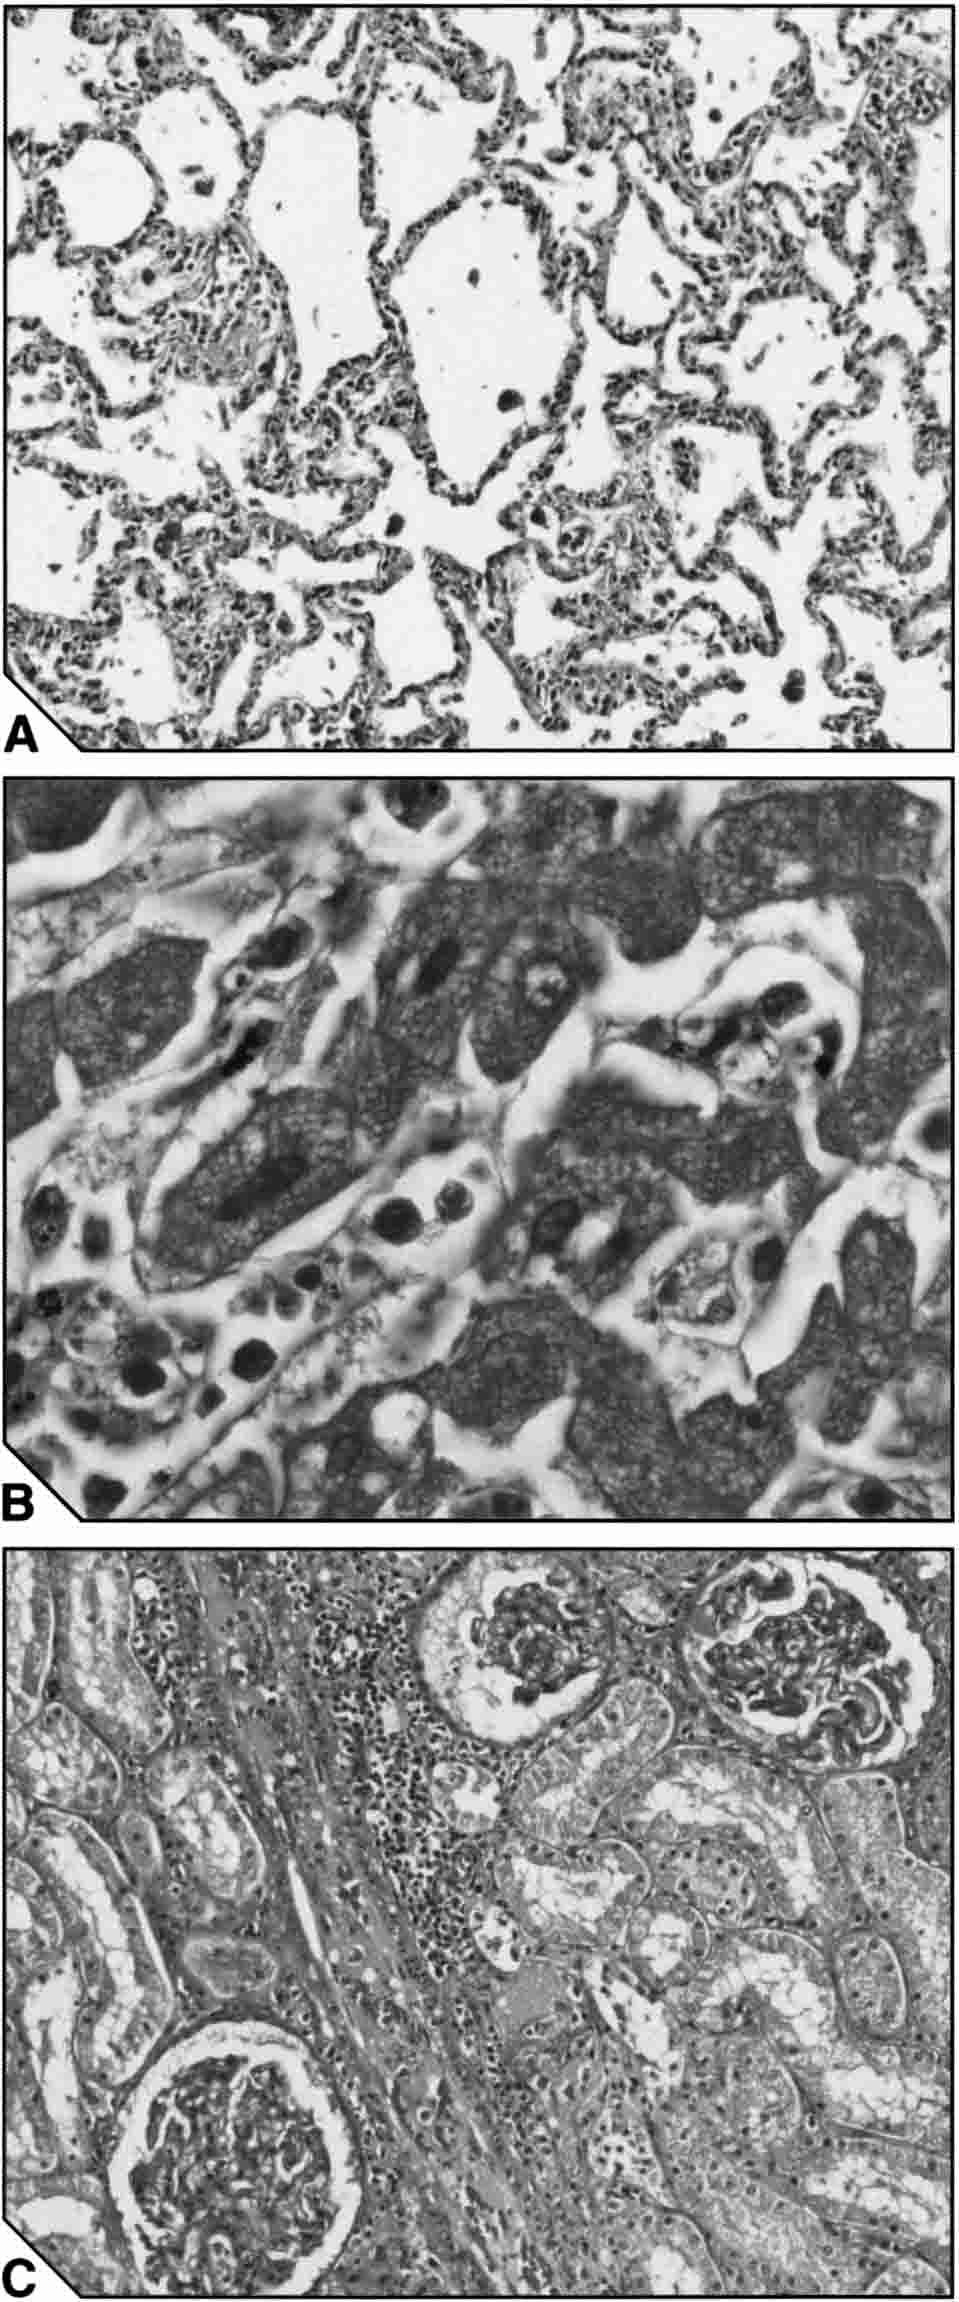 192 OZWARA AND OTHERS mental or diffuse increase in volume of mesangial matrix. Atrophic glomeruli were an occasional finding. No lesions were observed in animals with mild malaria.